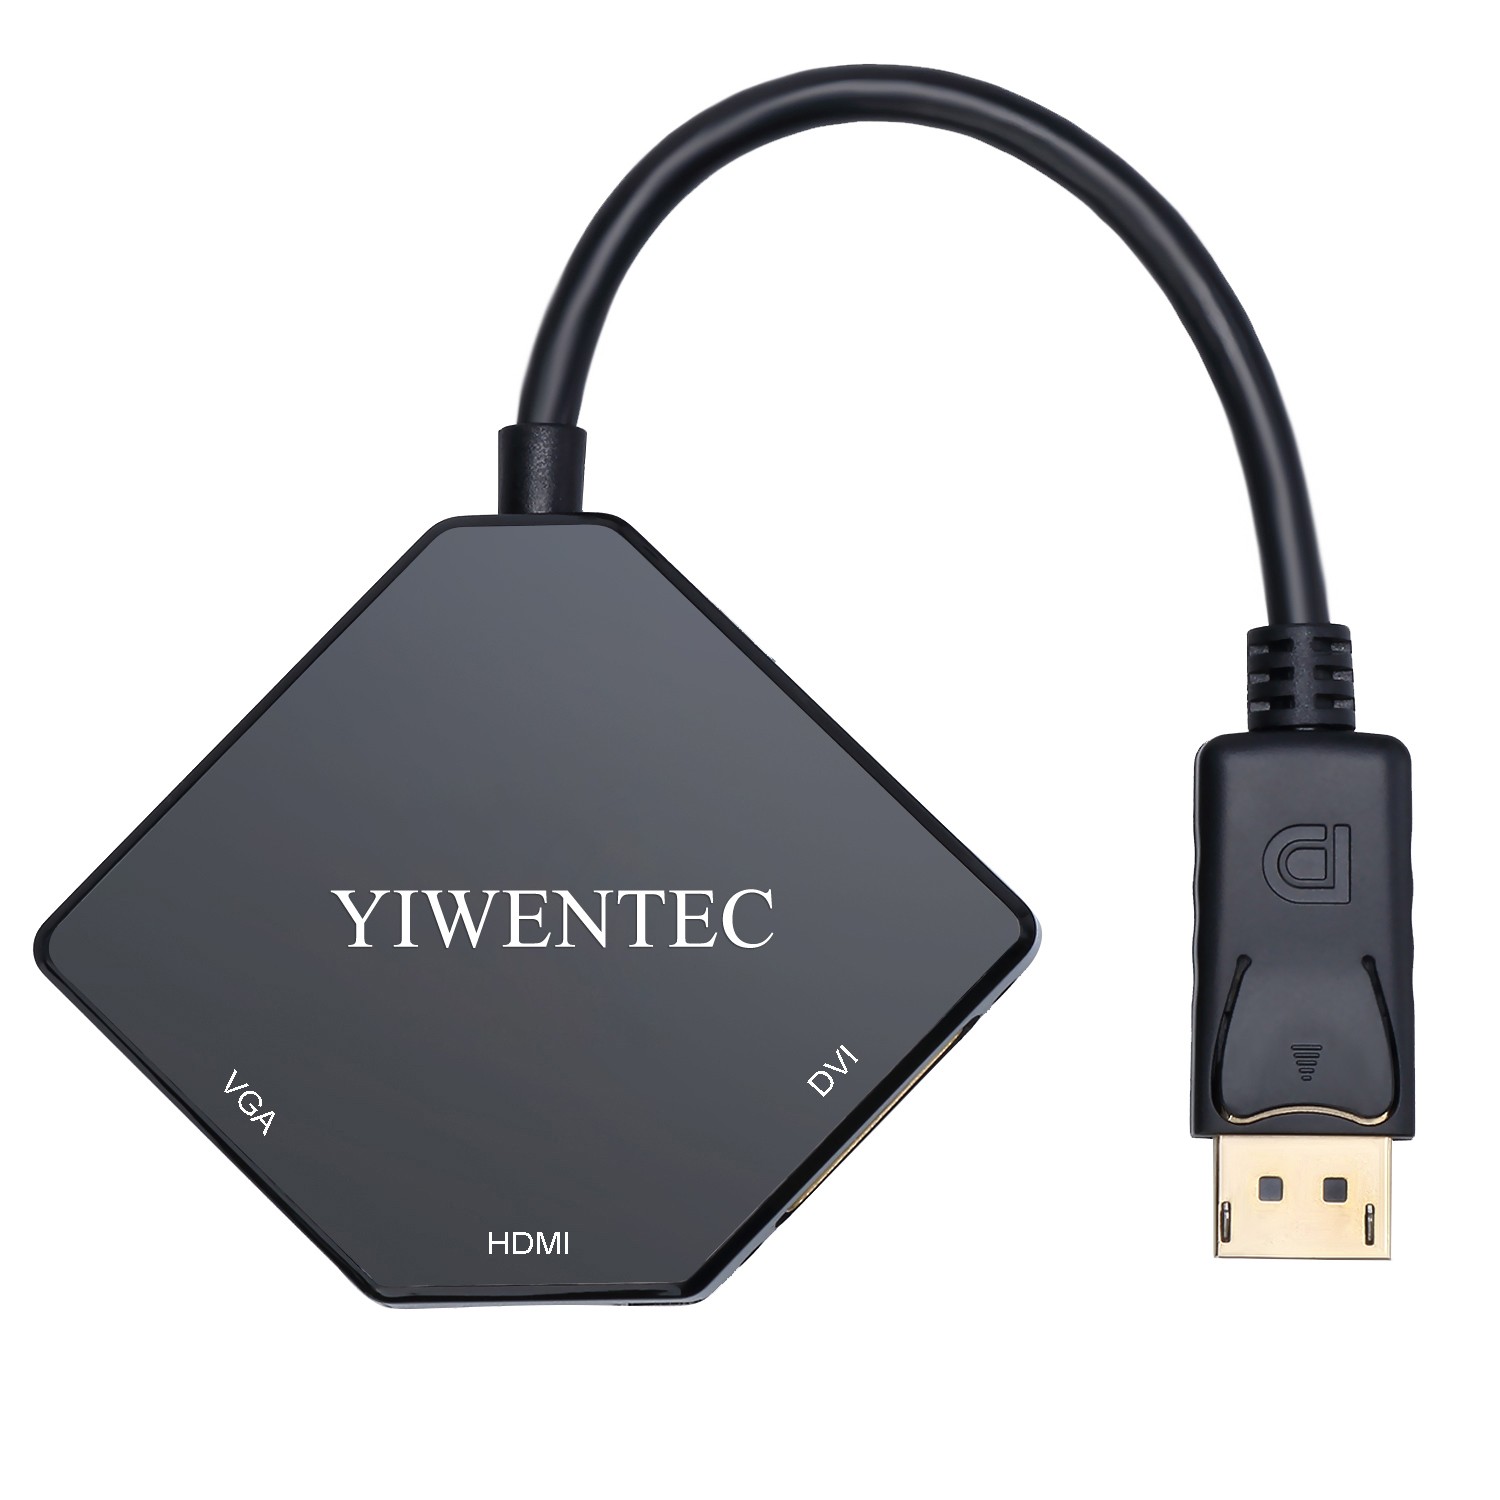 YIWENTEC displayport hub display Port to hdmi VGA DVI Adapter Cable Male to  Female multi-port Converter for pc Monitor Projector hdtv B0209-Multiport  Displayport to HDMI DVI VGA-YIWENTEC